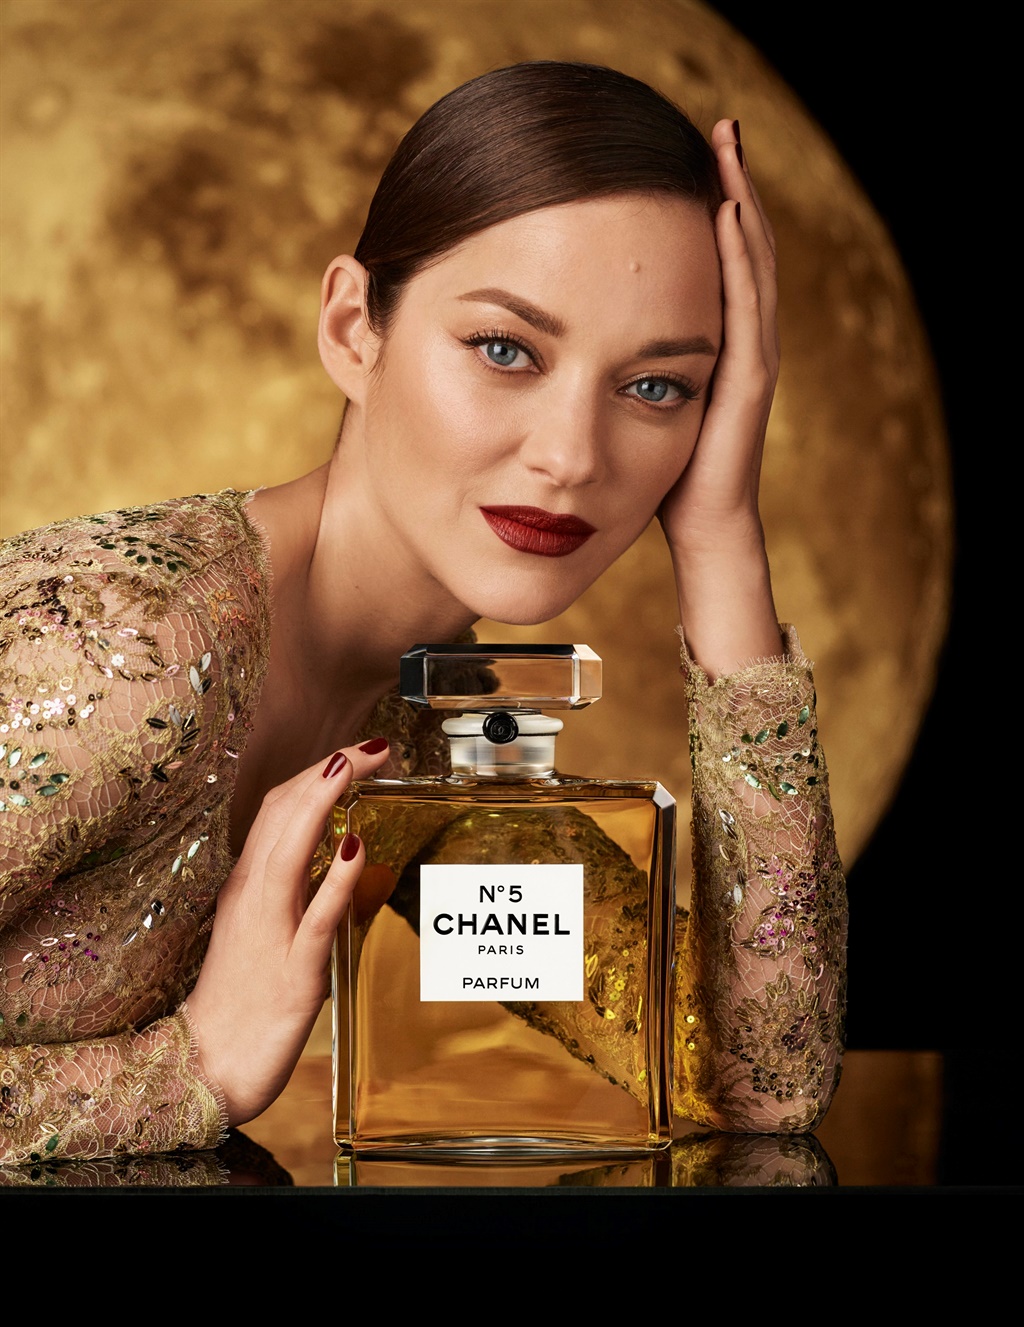 WATCH | Marion Cotillard covers Lorde's 'Team' in new romantic Chanel N°5  film by Chernobyl director | Life